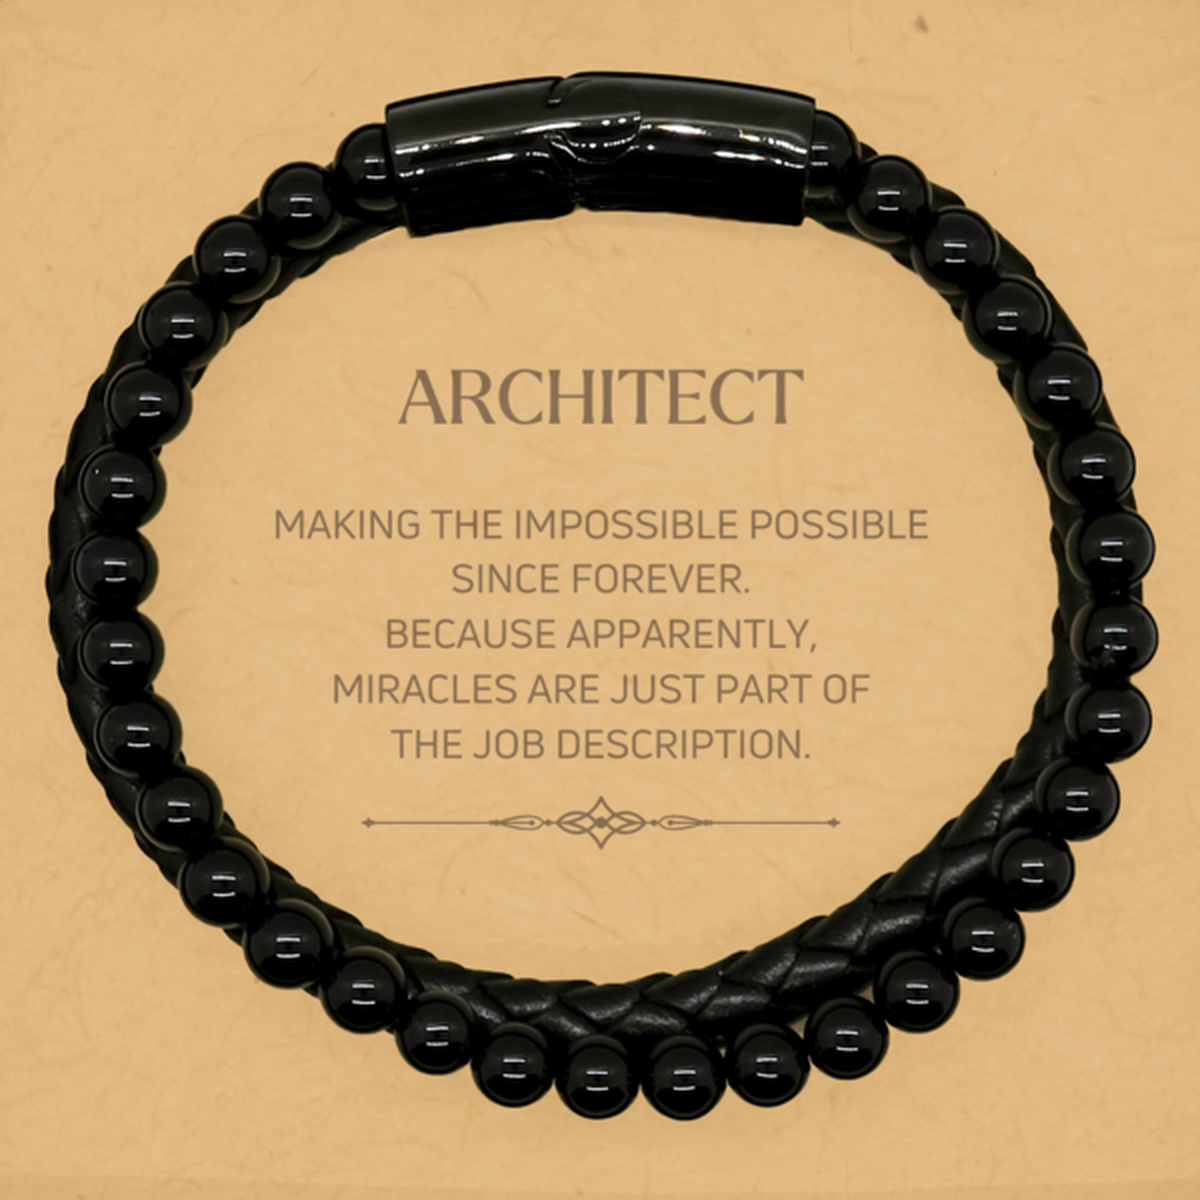 Funny Architect Gifts, Miracles are just part of the job description, Inspirational Birthday Stone Leather Bracelets For Architect, Men, Women, Coworkers, Friends, Boss